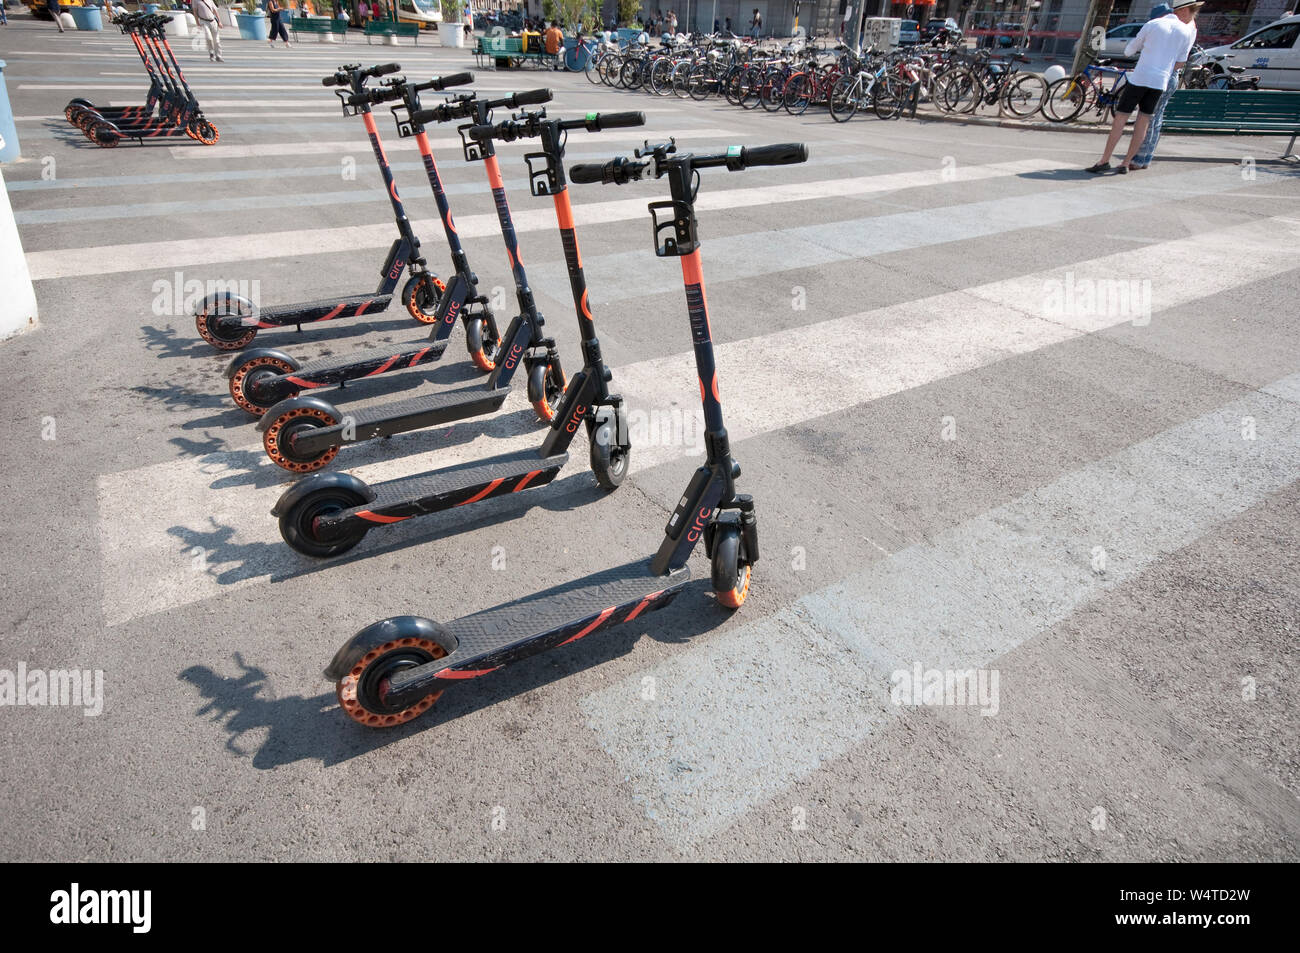 Italy, Lombardy, Milan, Electric Scooters Rental all Lined Up in the Public  Spaces Stock Photo - Alamy